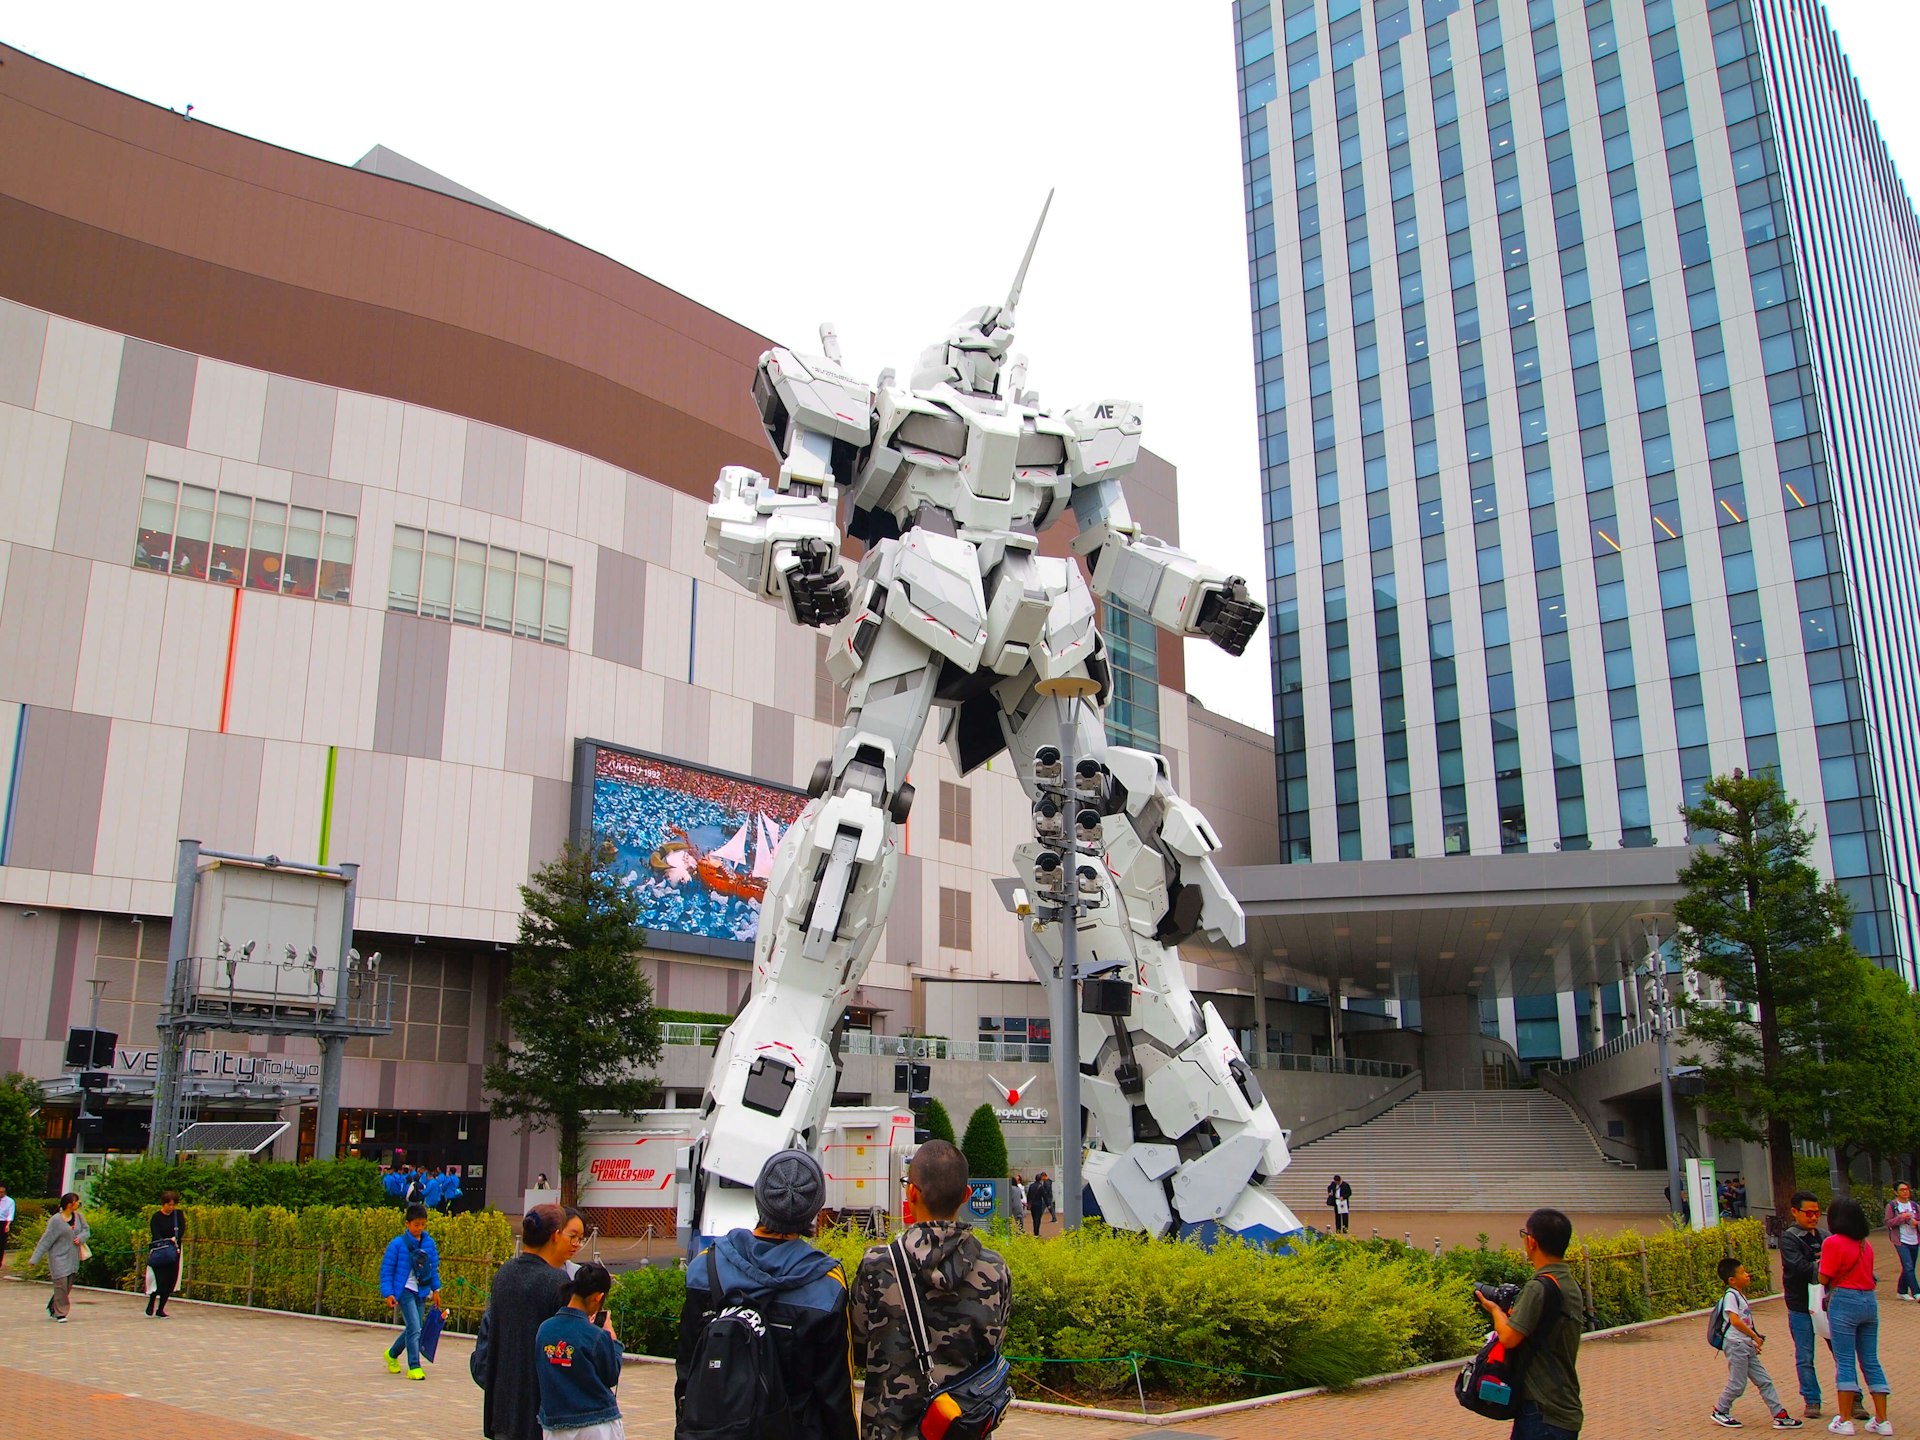 The Life-Sized Unicorn Gundam Statue" in Odaiba, Tokyo. Unicorn Gundam is a fictional robot featured in one of the titles of a famous Japanese anime series.